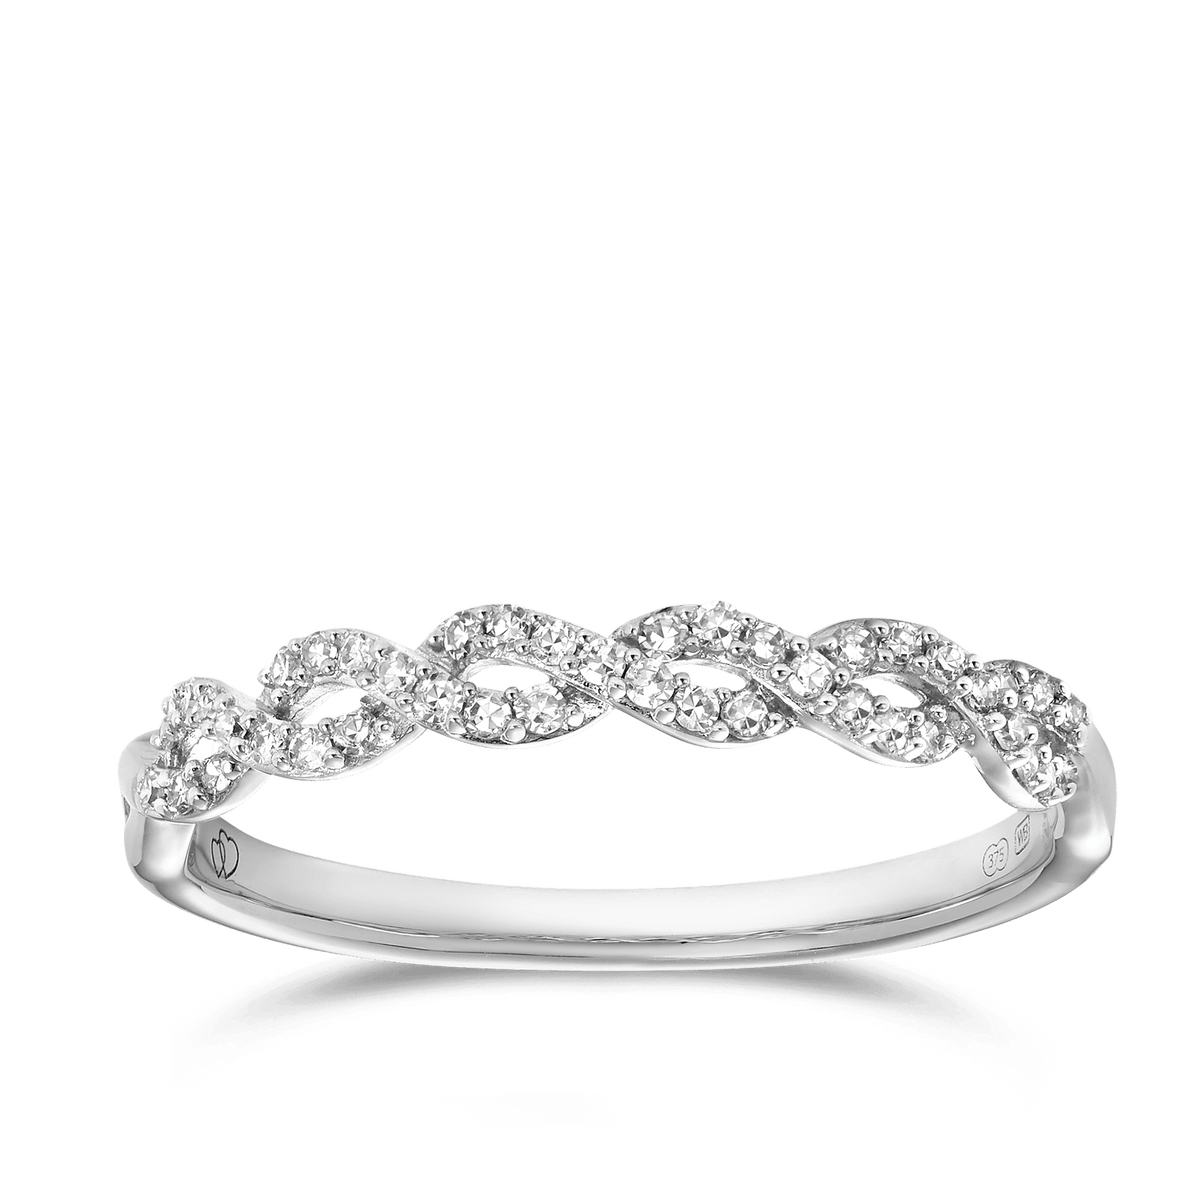 I Will® Round Brilliant Cut Diamond Twist Promise Ring in 9ct White Gold - Wallace Bishop